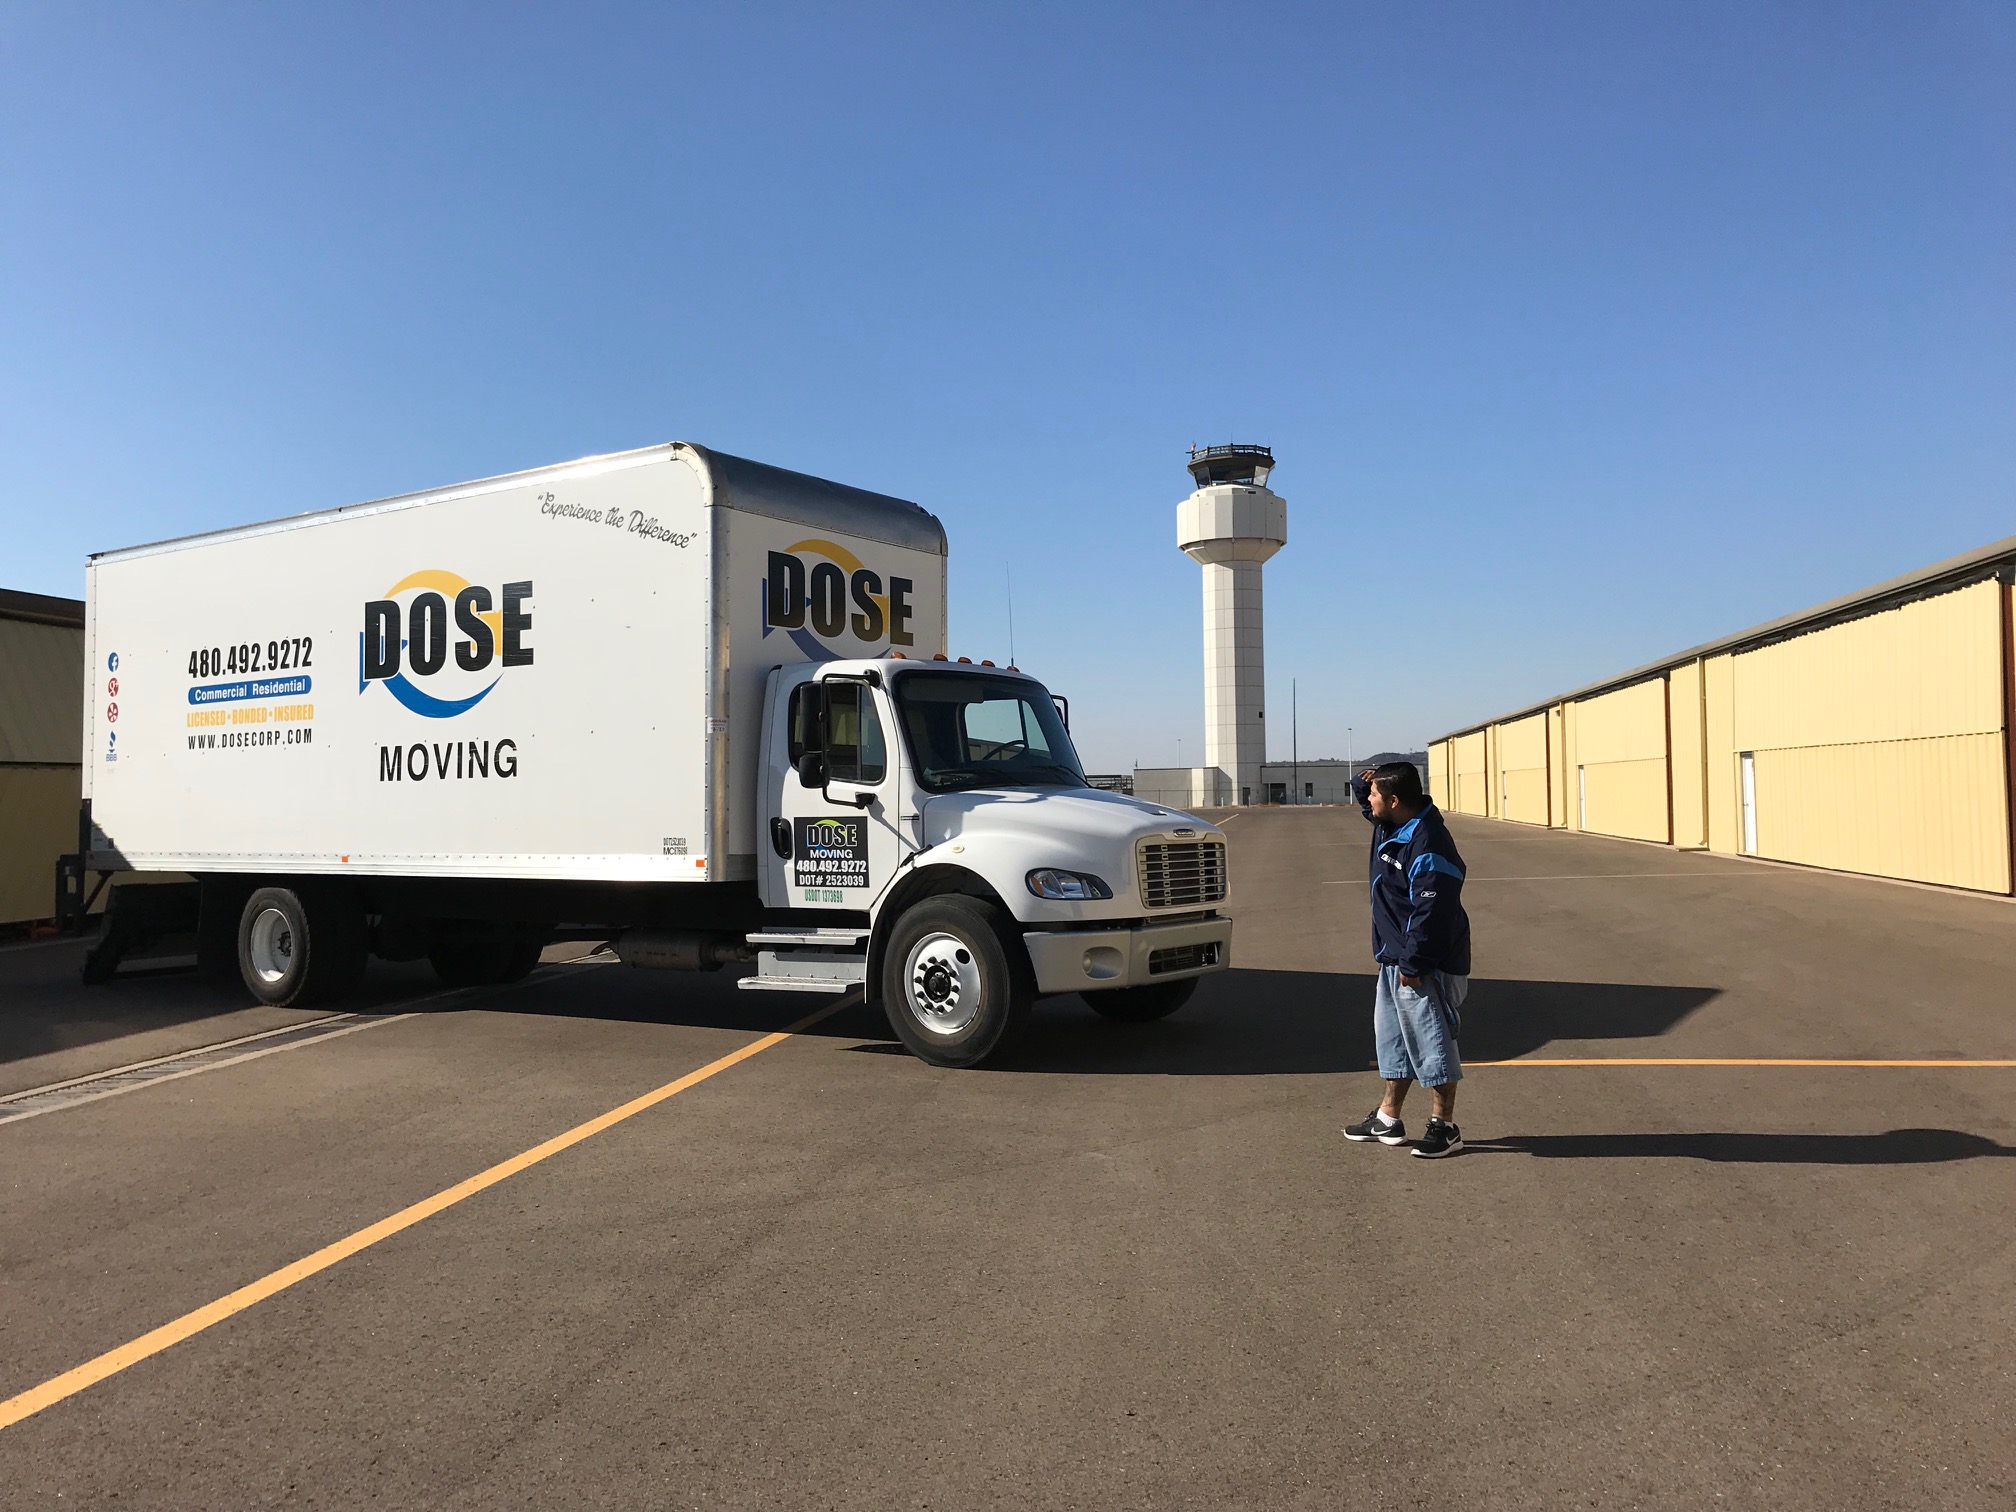 Dose Moving Truck air tower